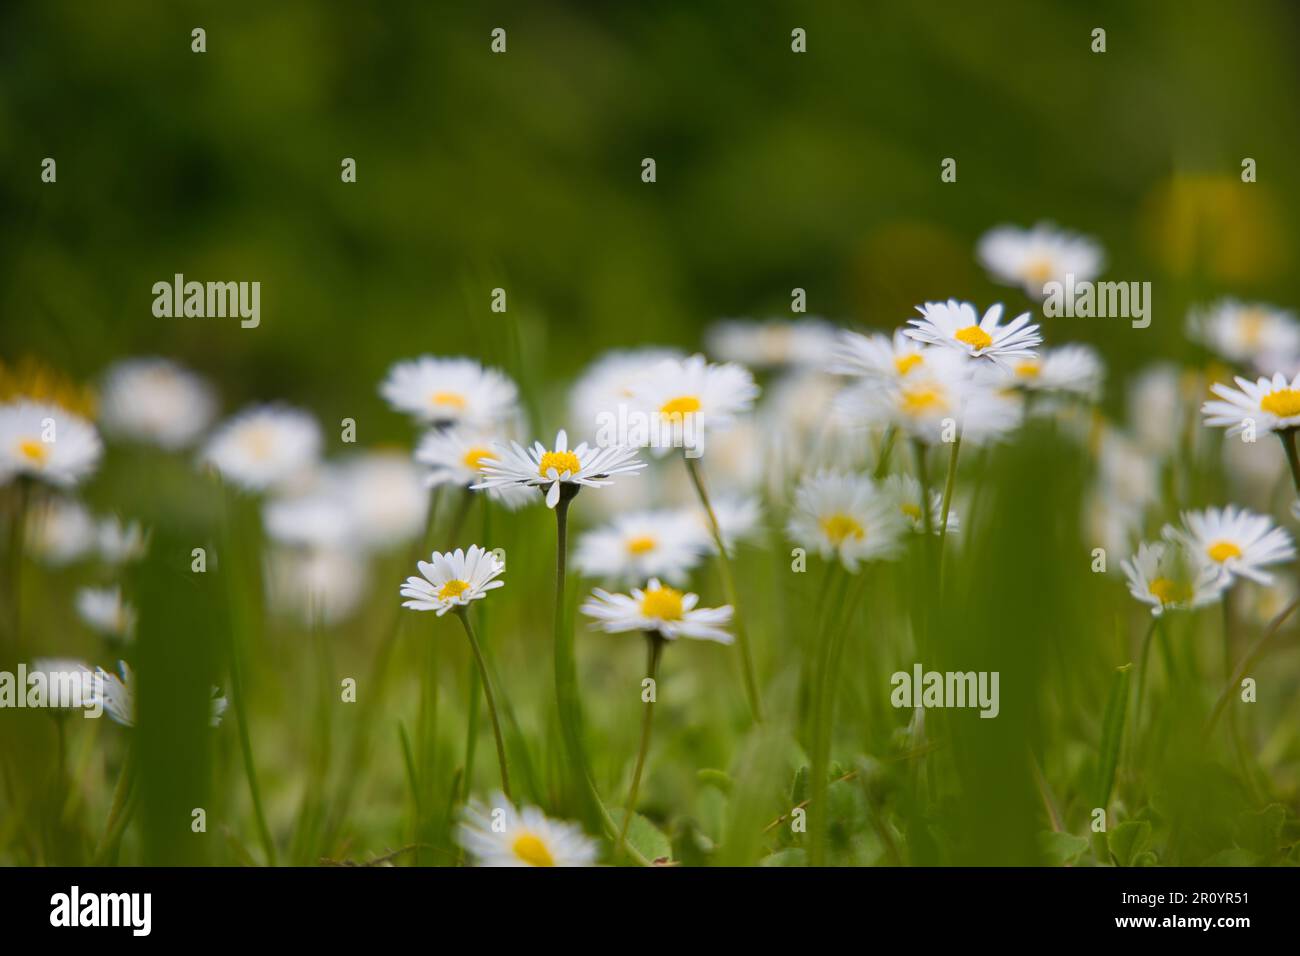 Daisy flowers with blurry background Stock Photo